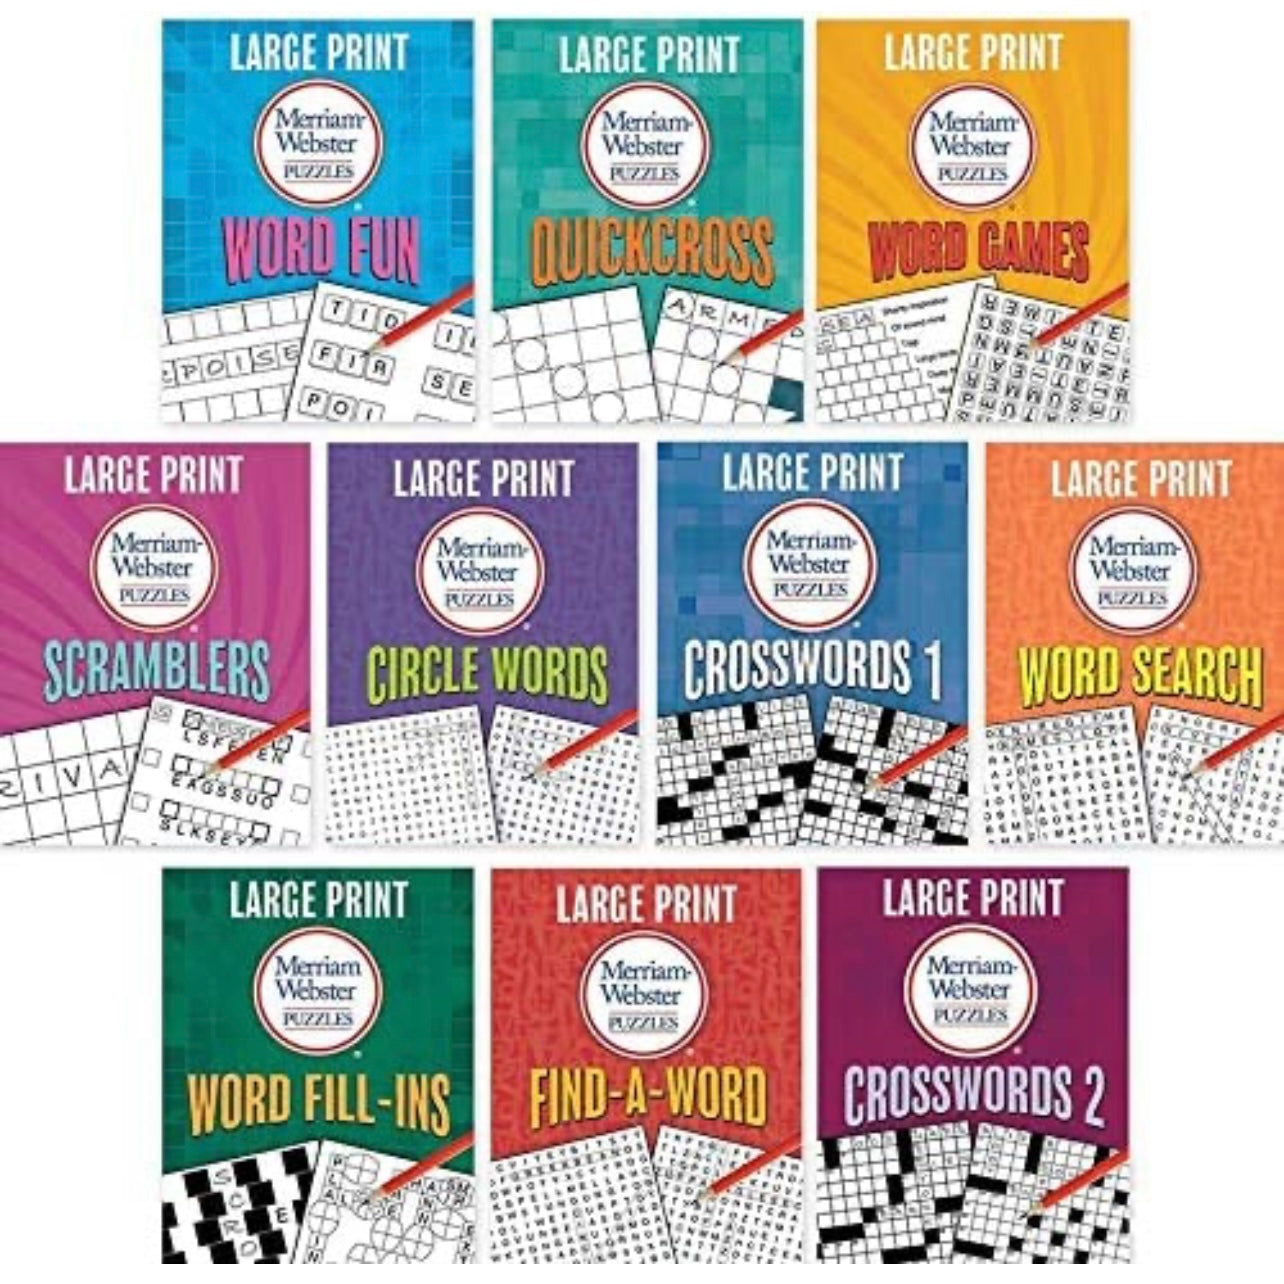 Merriam-Webster's Puzzle Games Booklets